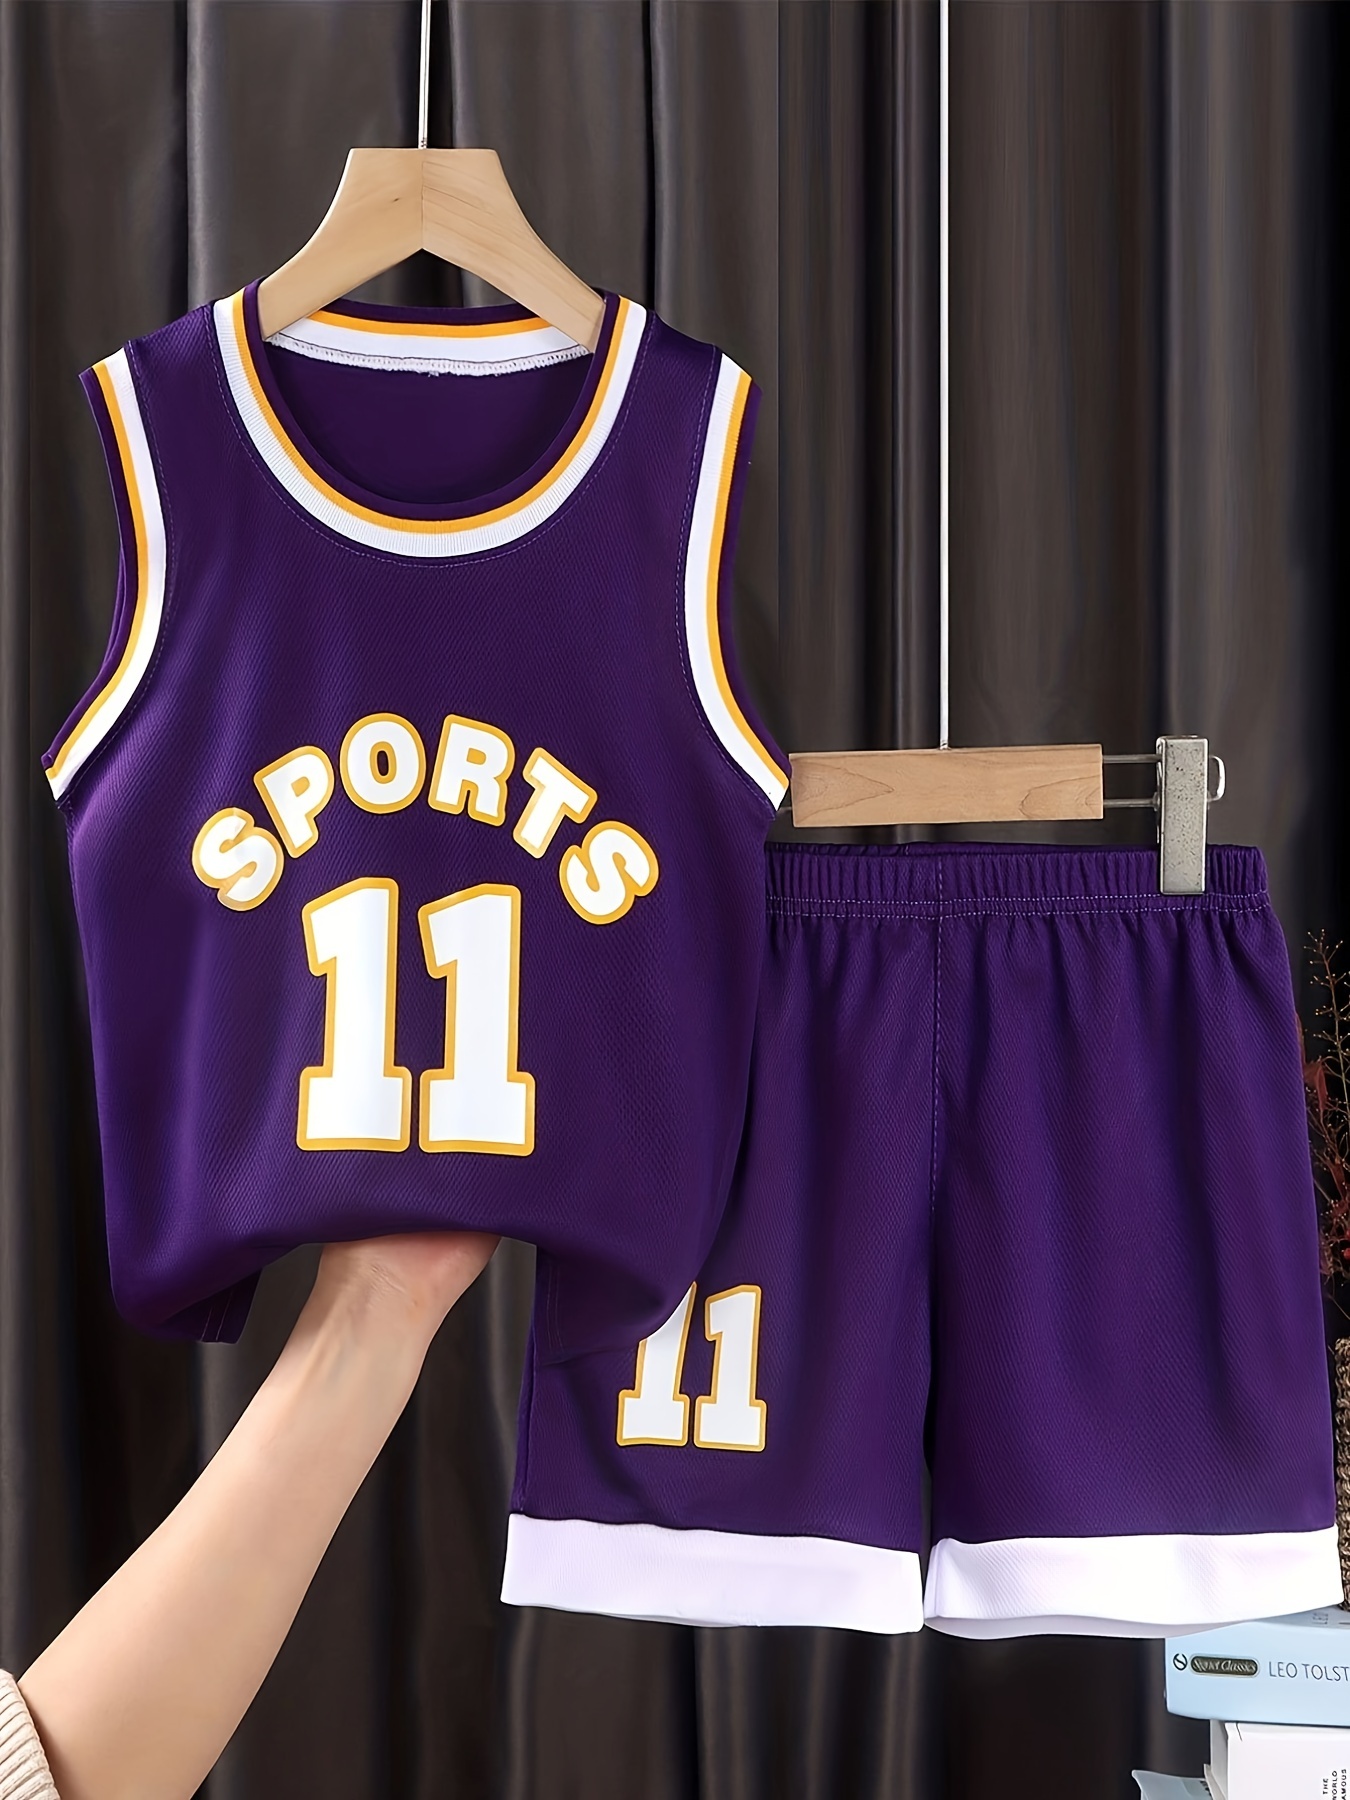 Temu Boys & Girls Basketball Outfit - Stylish Tank Top & Shorts Set for Summer Training & Competition